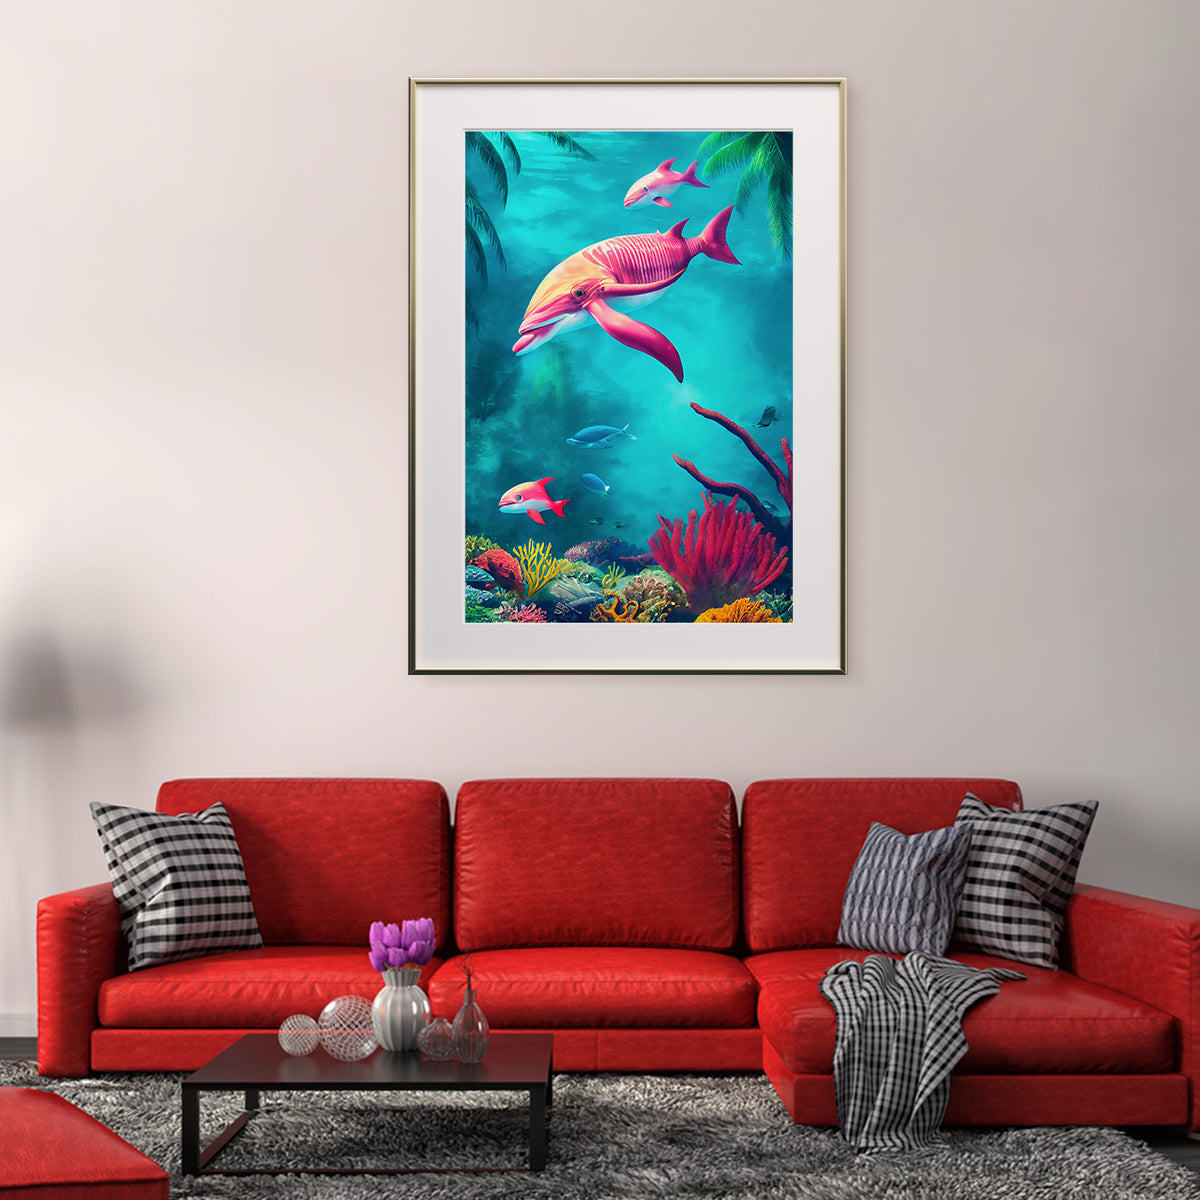 Underwater World with Dolphins Posters In Decor-Vertical Posters NOT FRAMED-CetArt-8″x10″ inches-CetArt